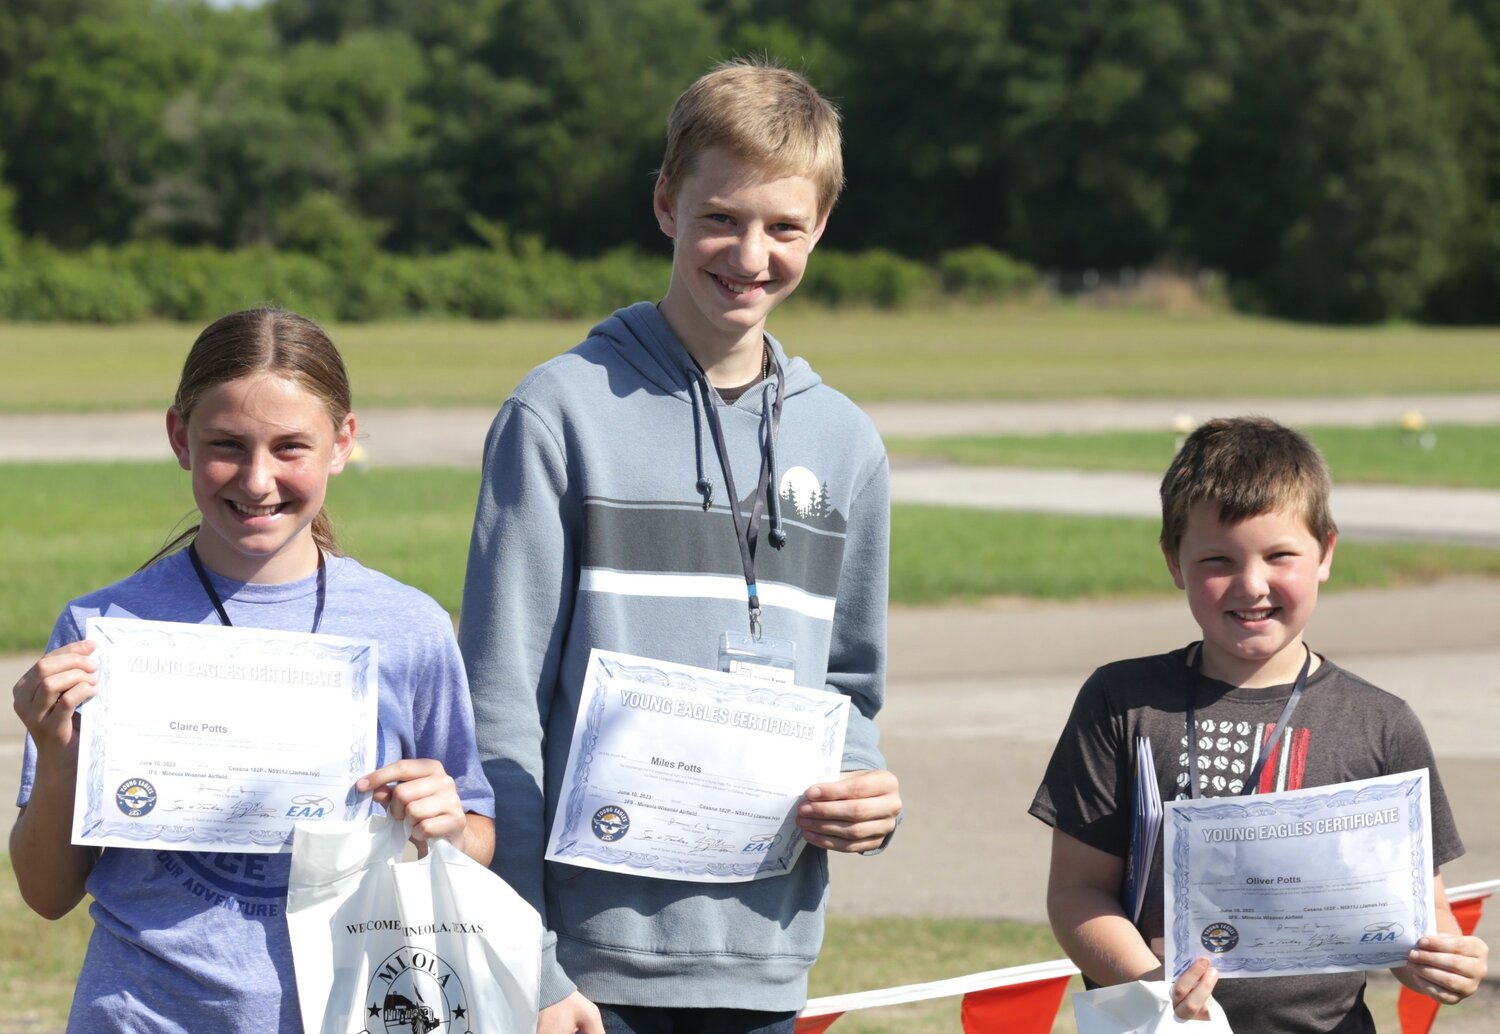 Claire, Miles and Oliver Potts of Mineola with their Young Eagle certificates.